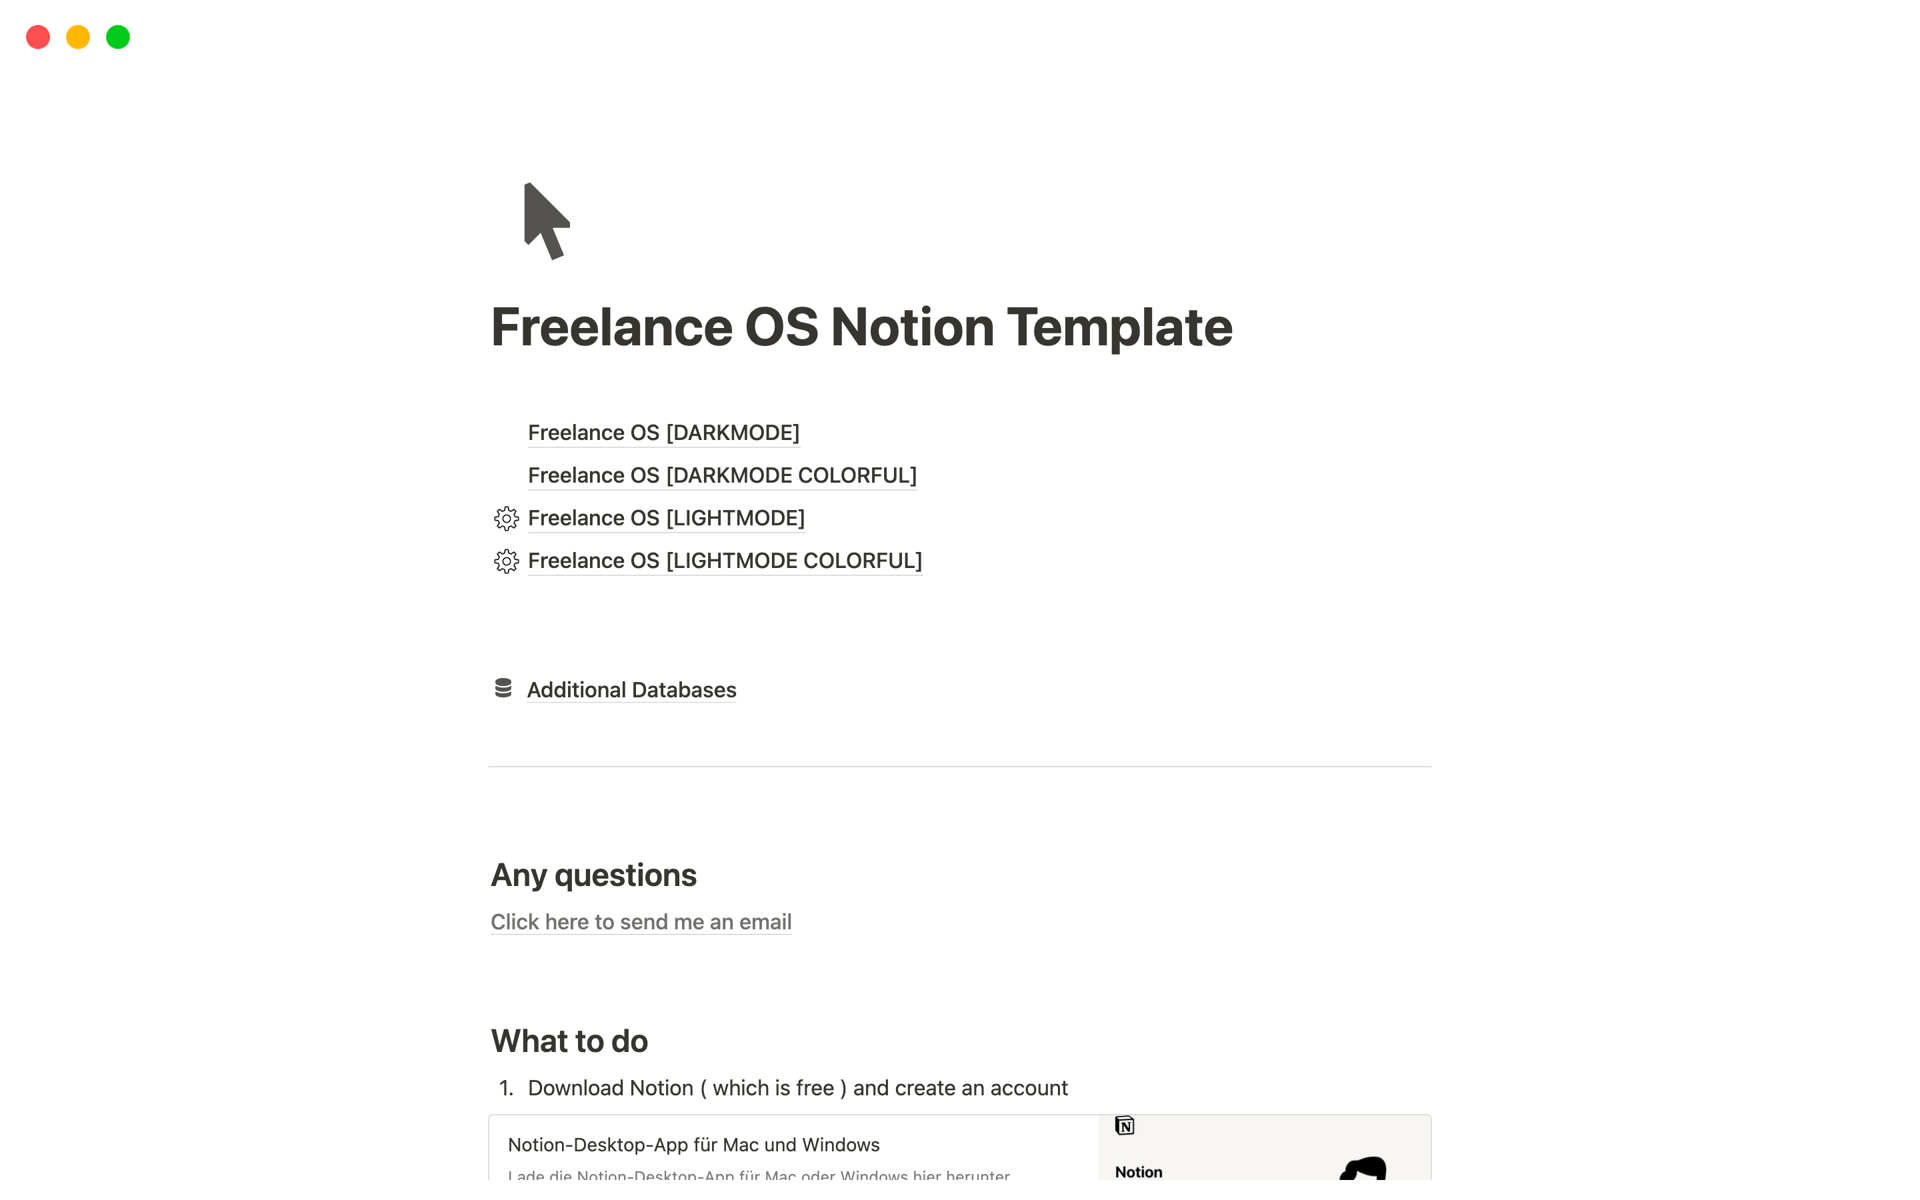 Freelance OS is a workspace designed to facilitate the life of a freelancer by providing the right tools to stay efficient.